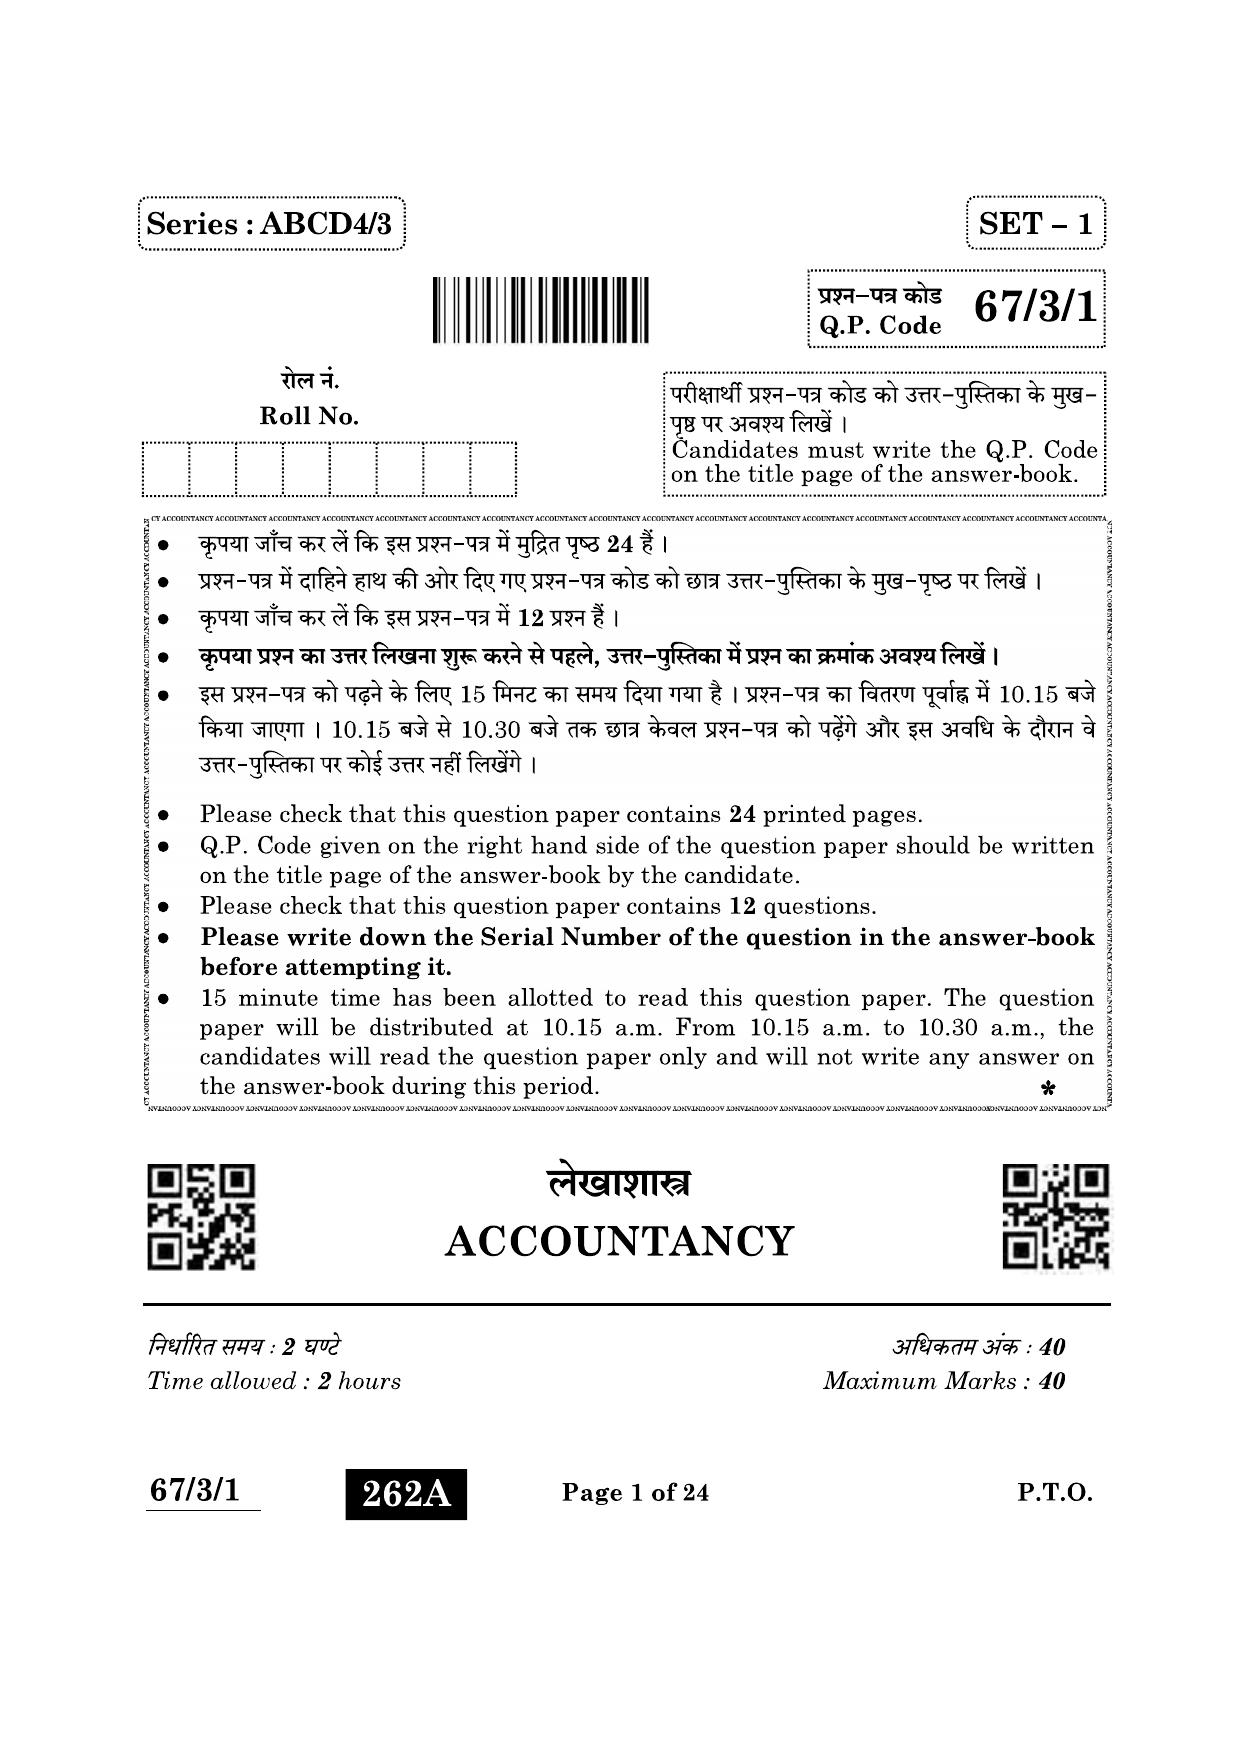 CBSE Class 12 67-3-1 Accountancy 2022 Question Paper - Page 1